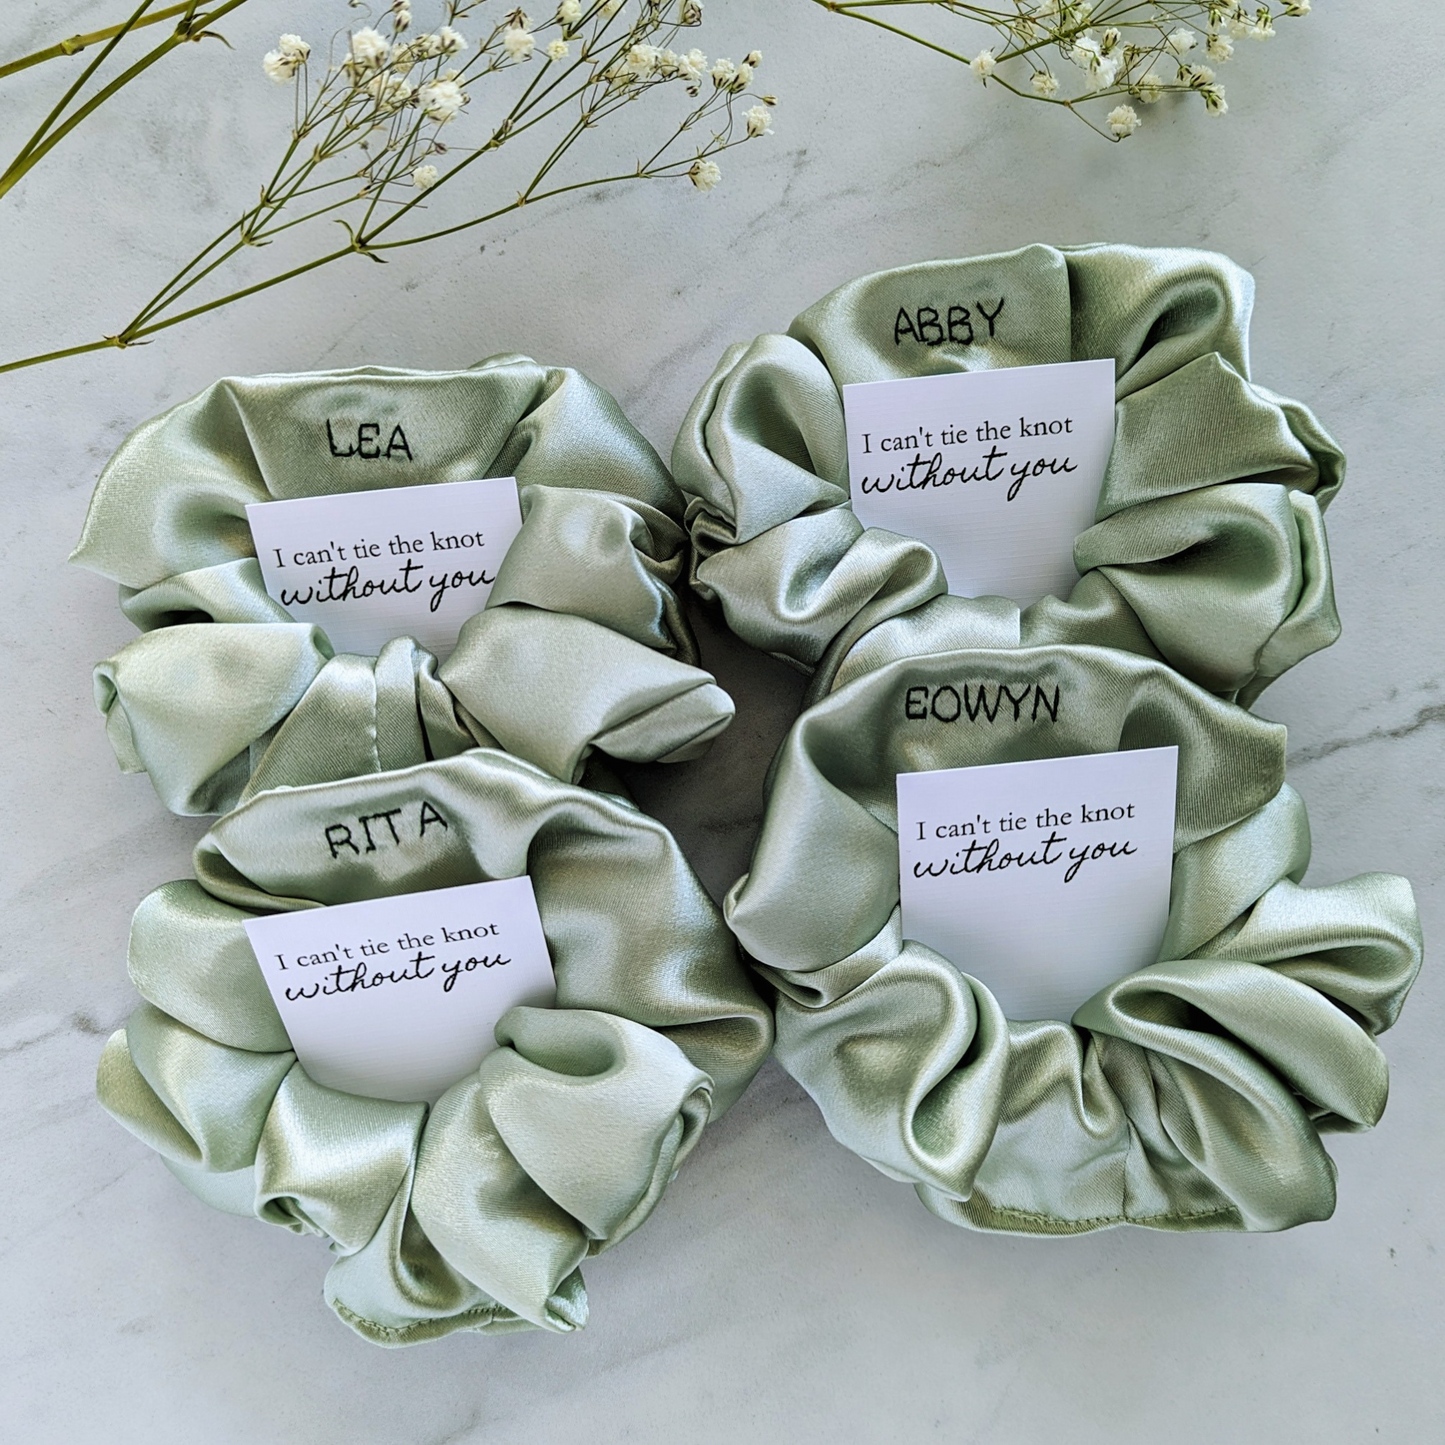 sage green bridesmaid satin scrunchies for proposal box  includes bridesmaid proposal card "I can't tie the knot without you"and a branded bag perfect for the luxe bridal party